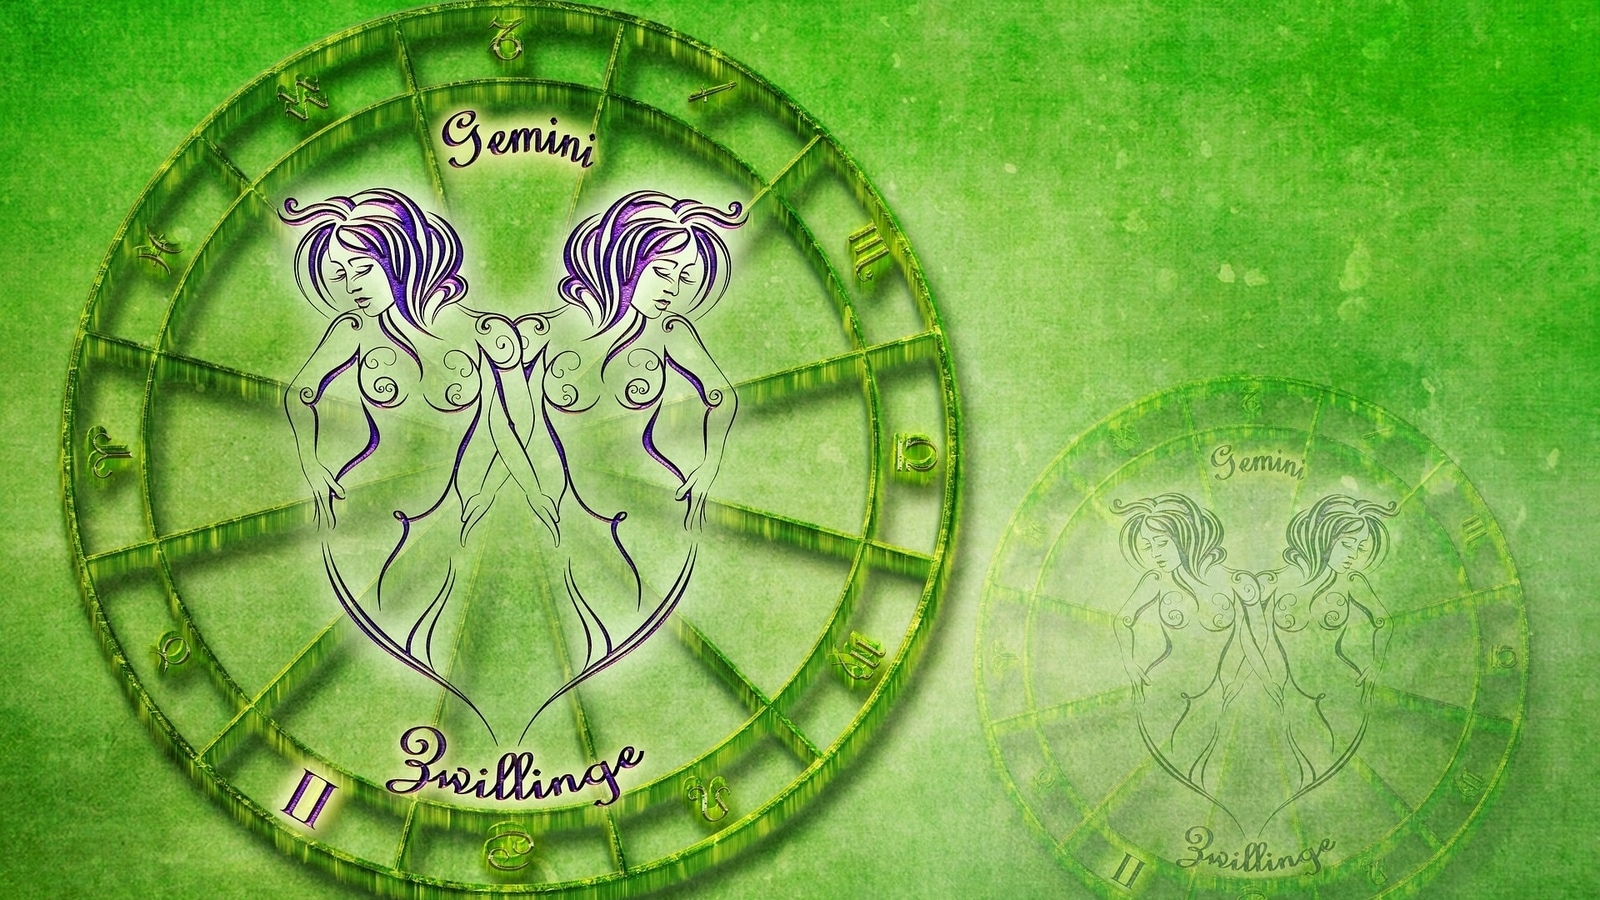 Gemini Horoscope Today, October 18, 2022: A good day to finish backlogs